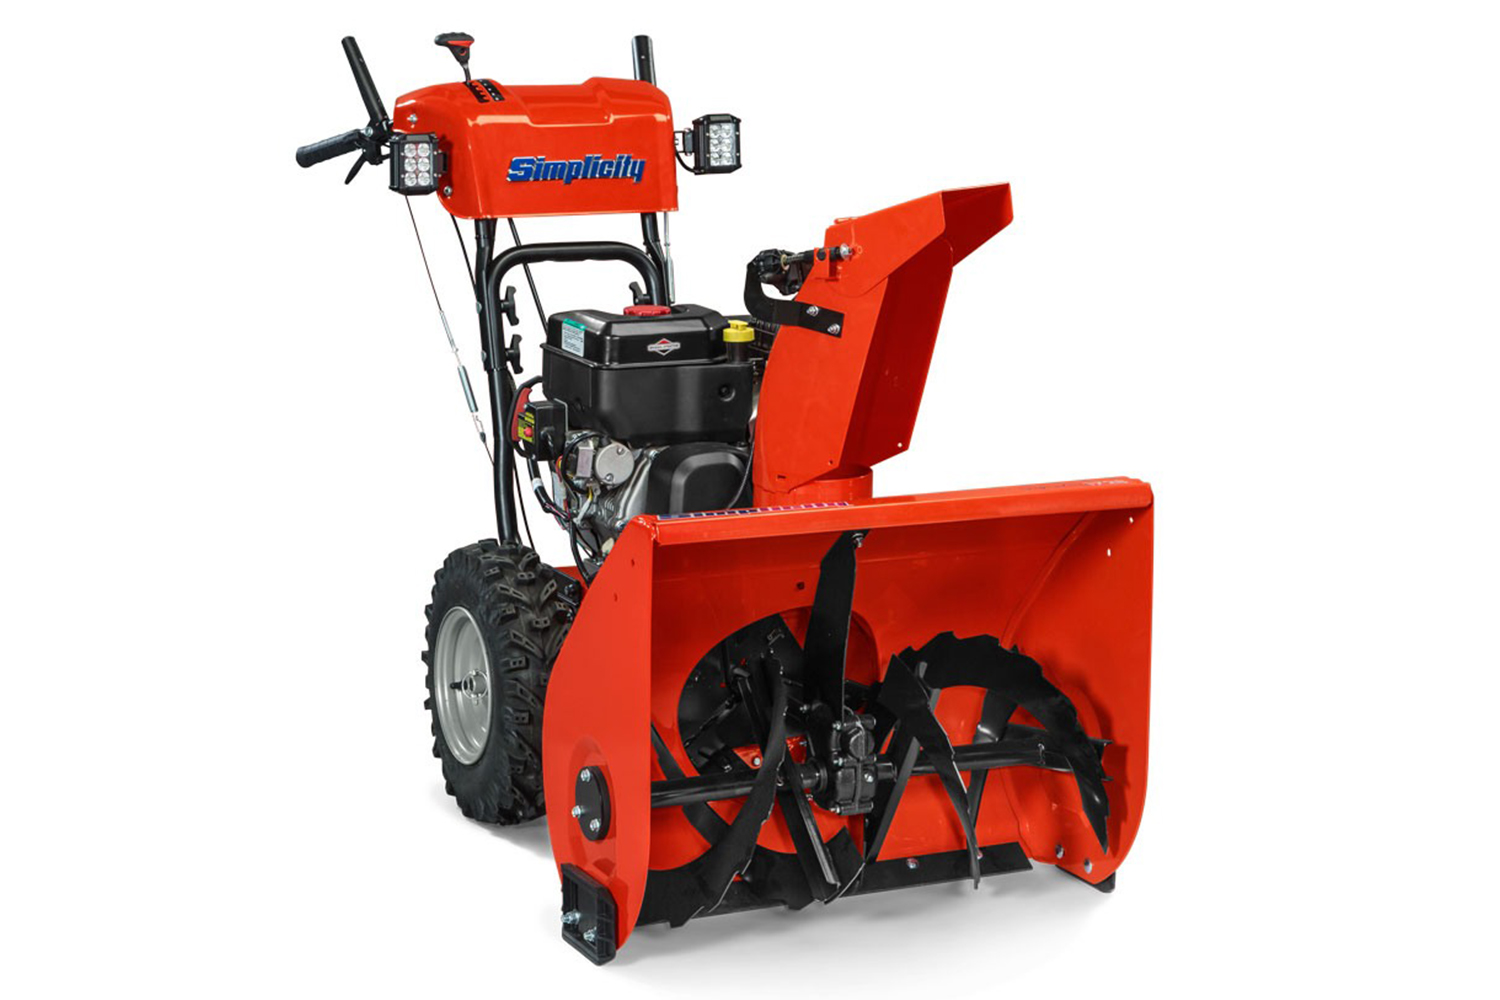 SIMPLICITY SIGNATURE SERIES DUAL-STAGE SNOW BLOWERS 1728<br/>*Model shown in image may vary.